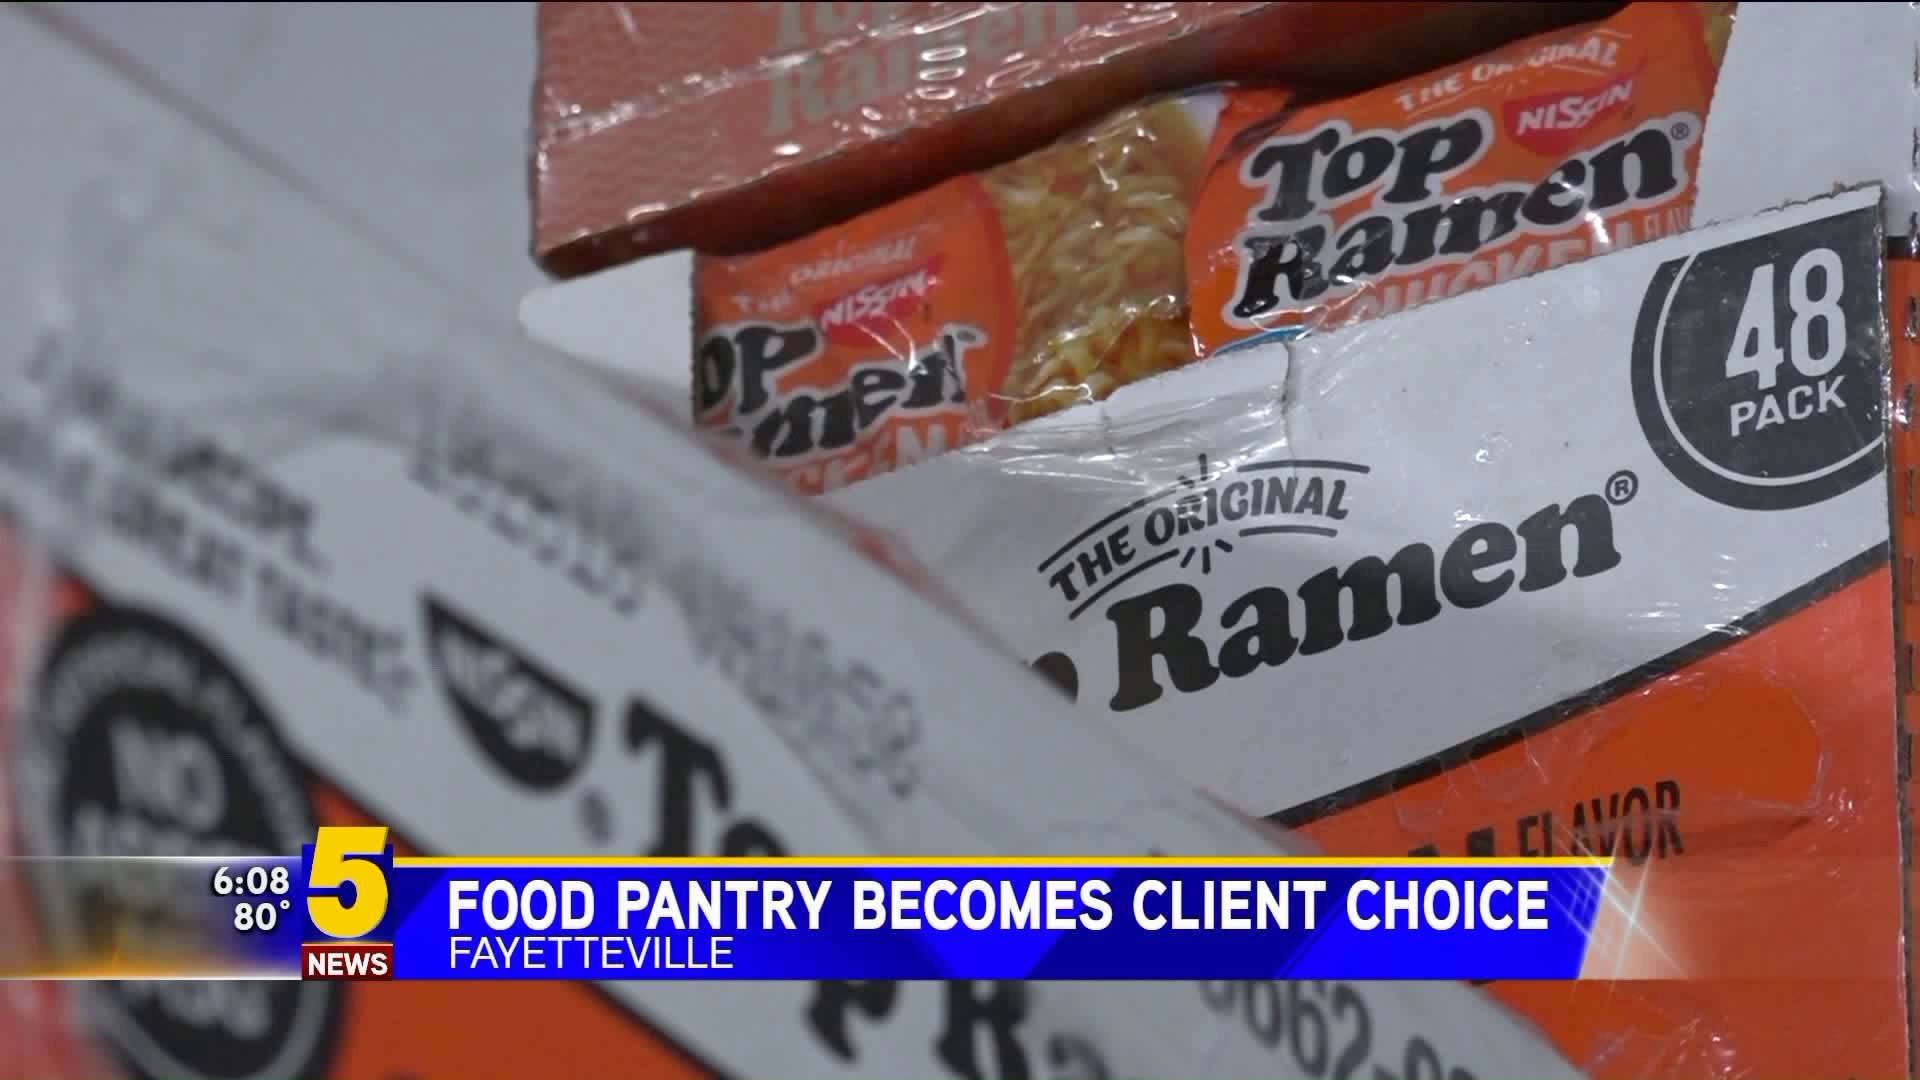 Food Pantry Becomes Client Choice